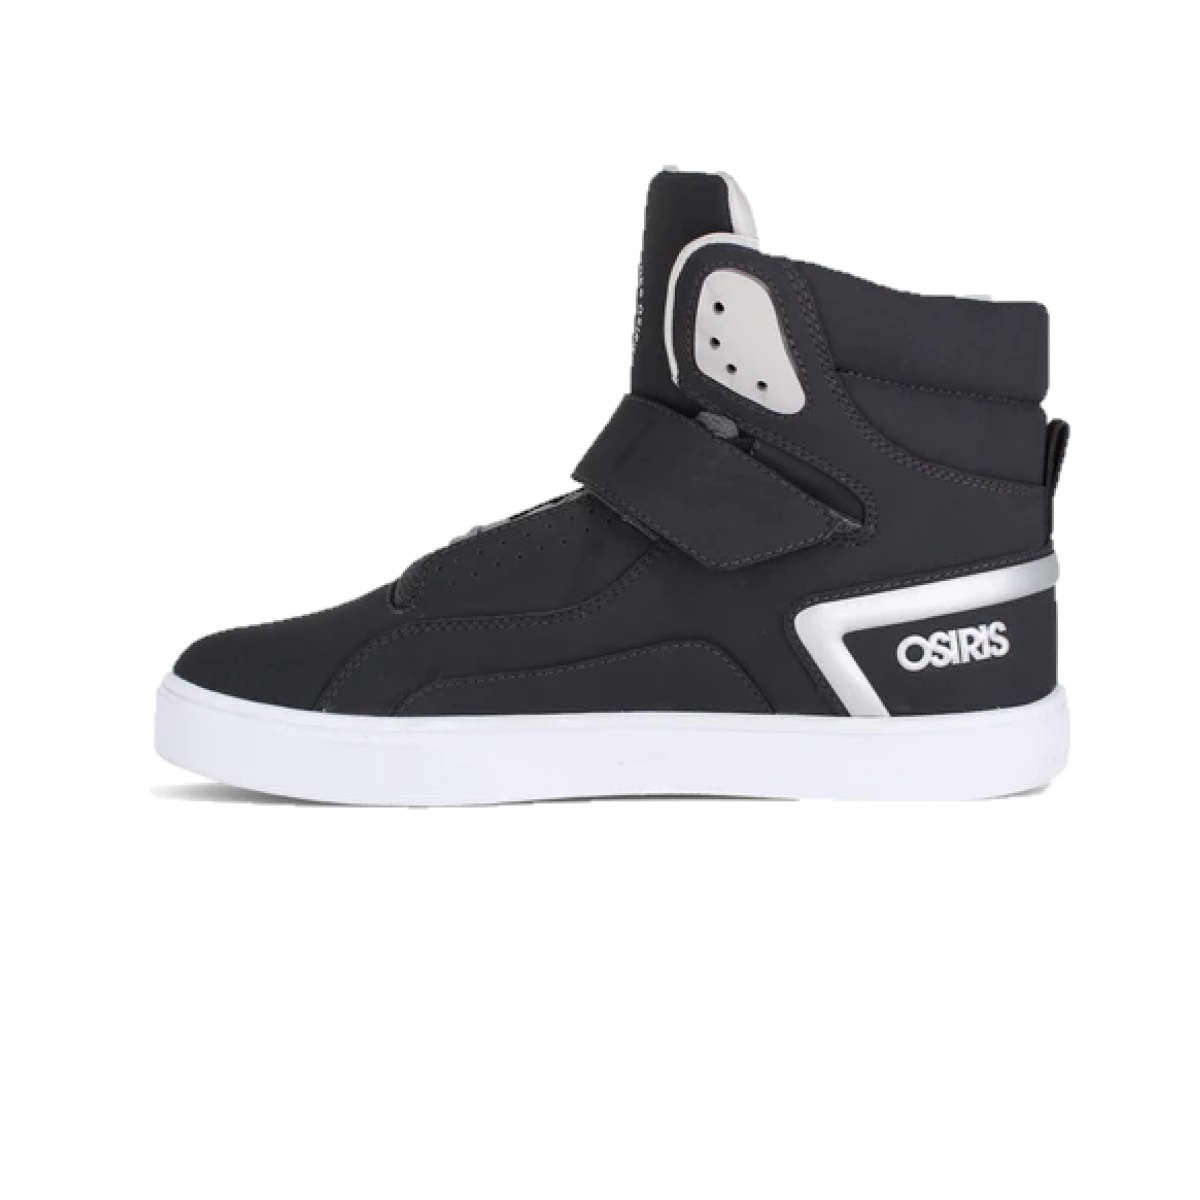 OSIRIS 13721156 RIZE ULTRA MN'S (Medium) Charcoal/White Synthetic Skate Shoes